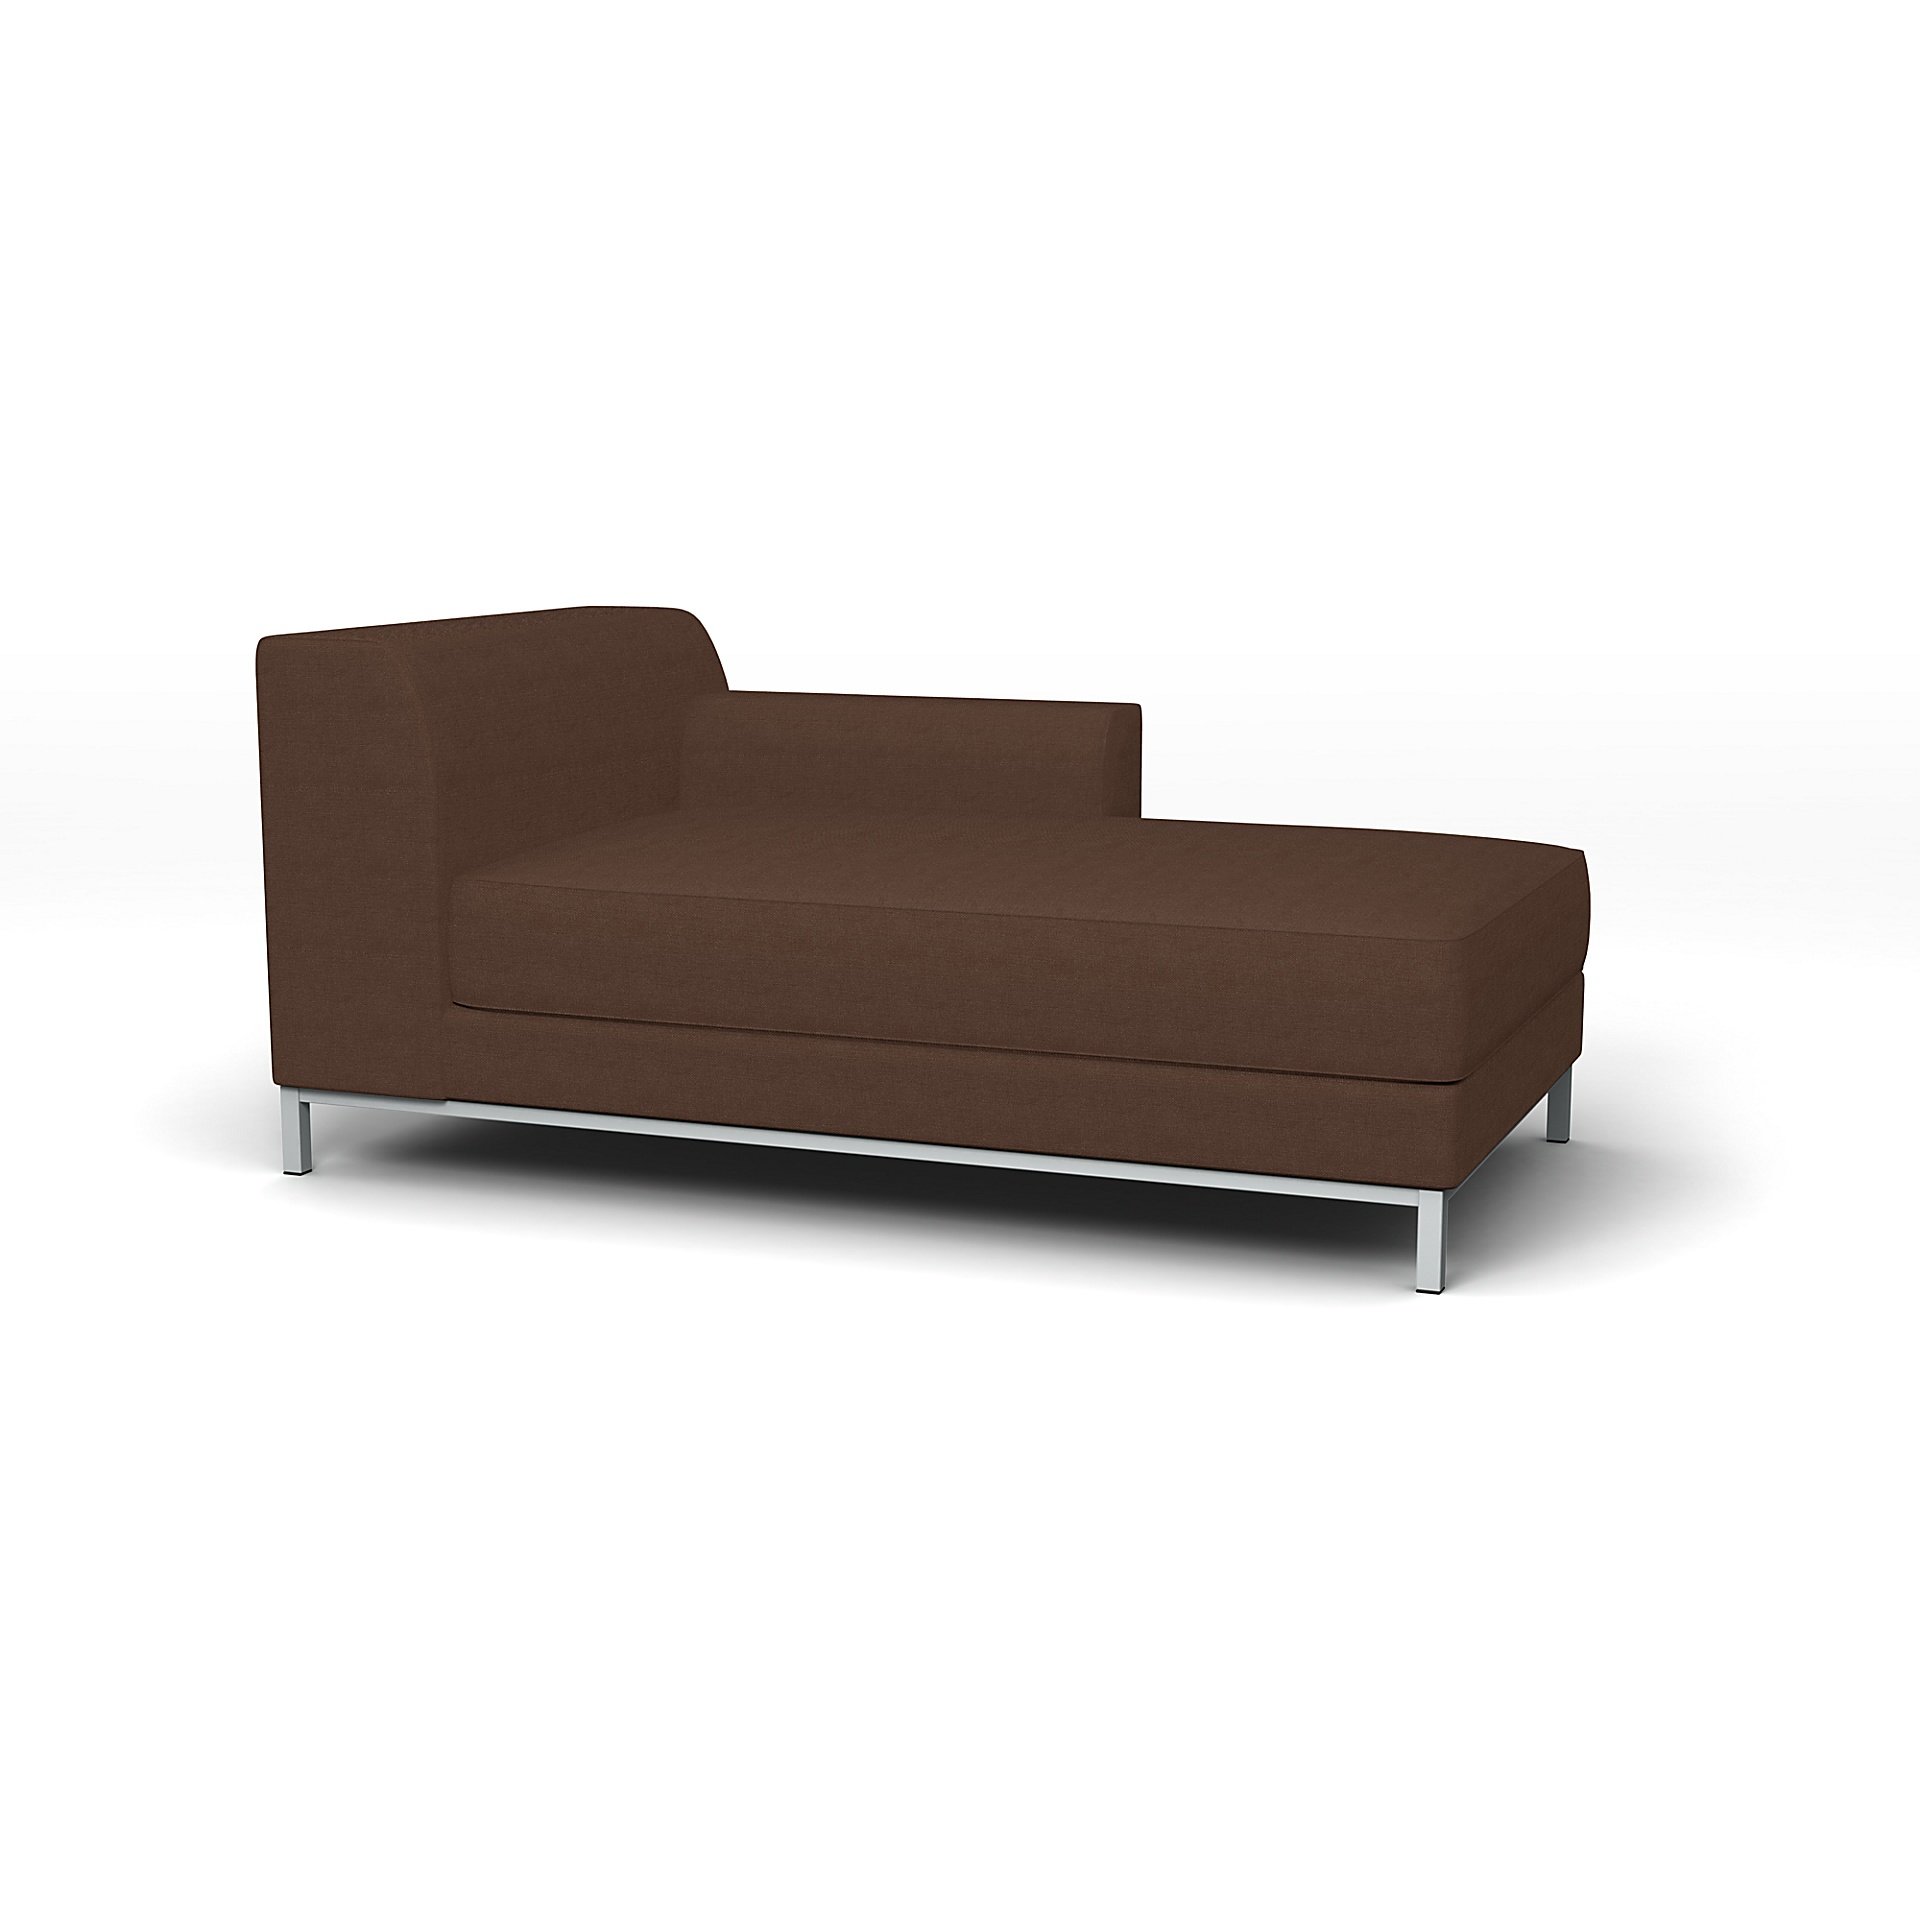 IKEA - Kramfors Chaise Longue with Right Arm Cover, Chocolate, Linen - Bemz